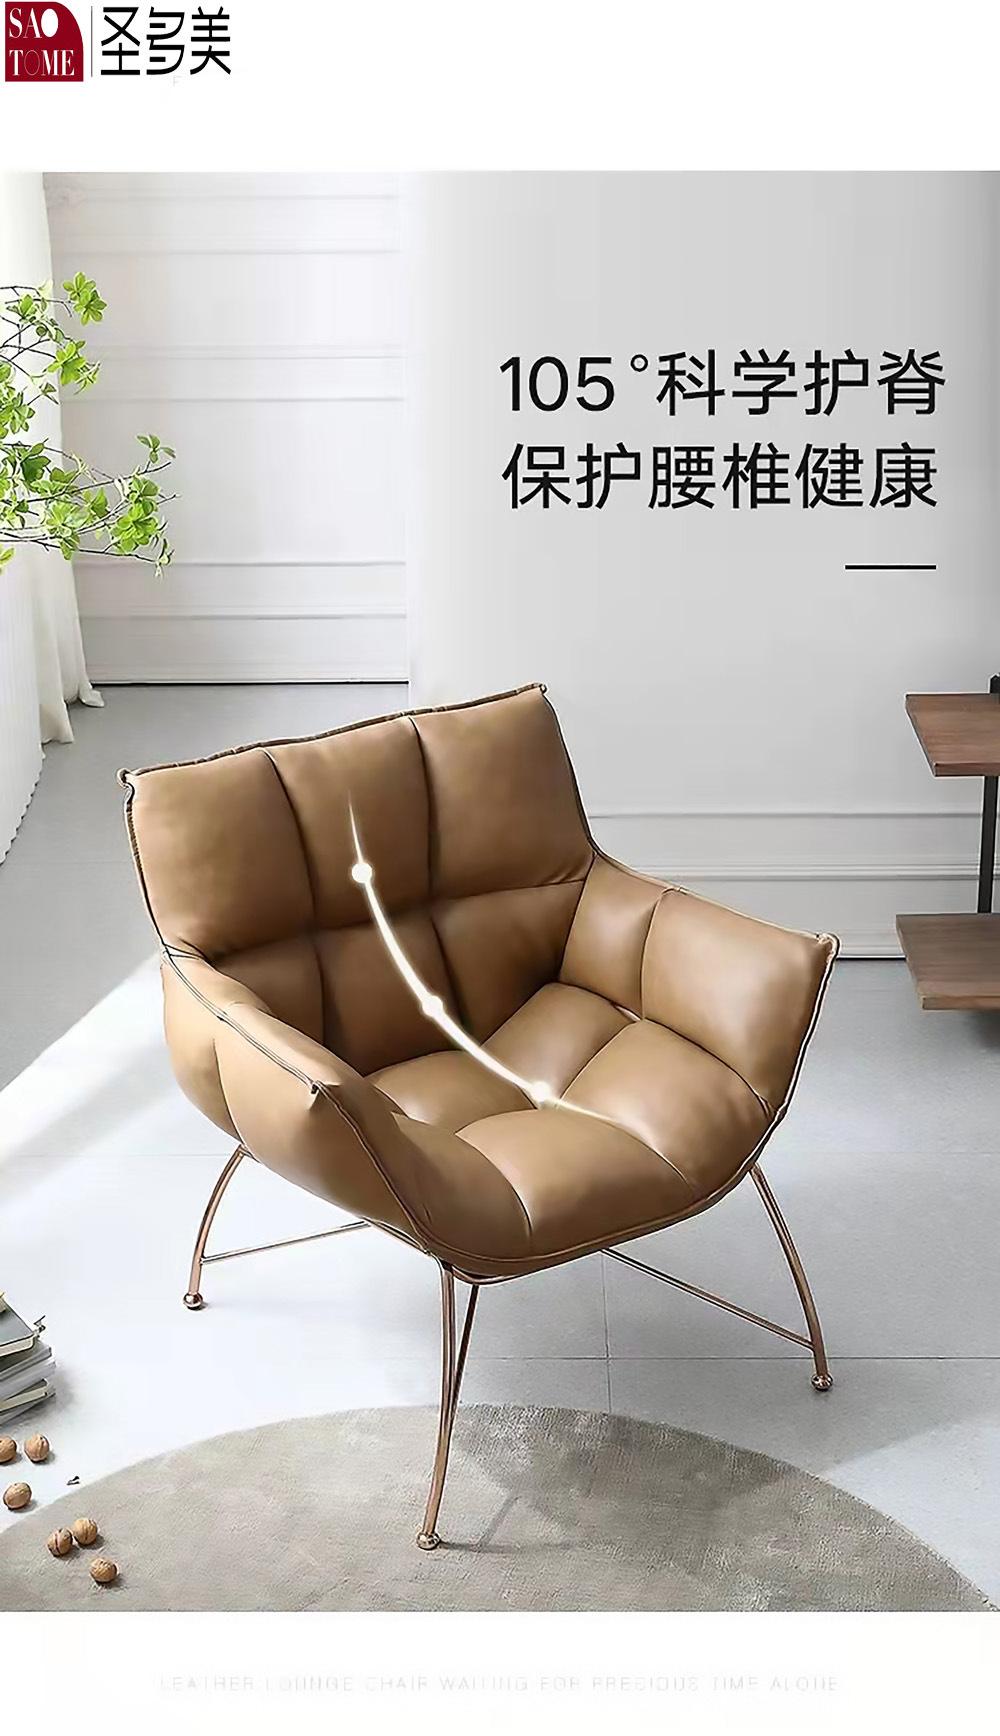 Gold Stainless Steel High End Upholstery Leisure Chair